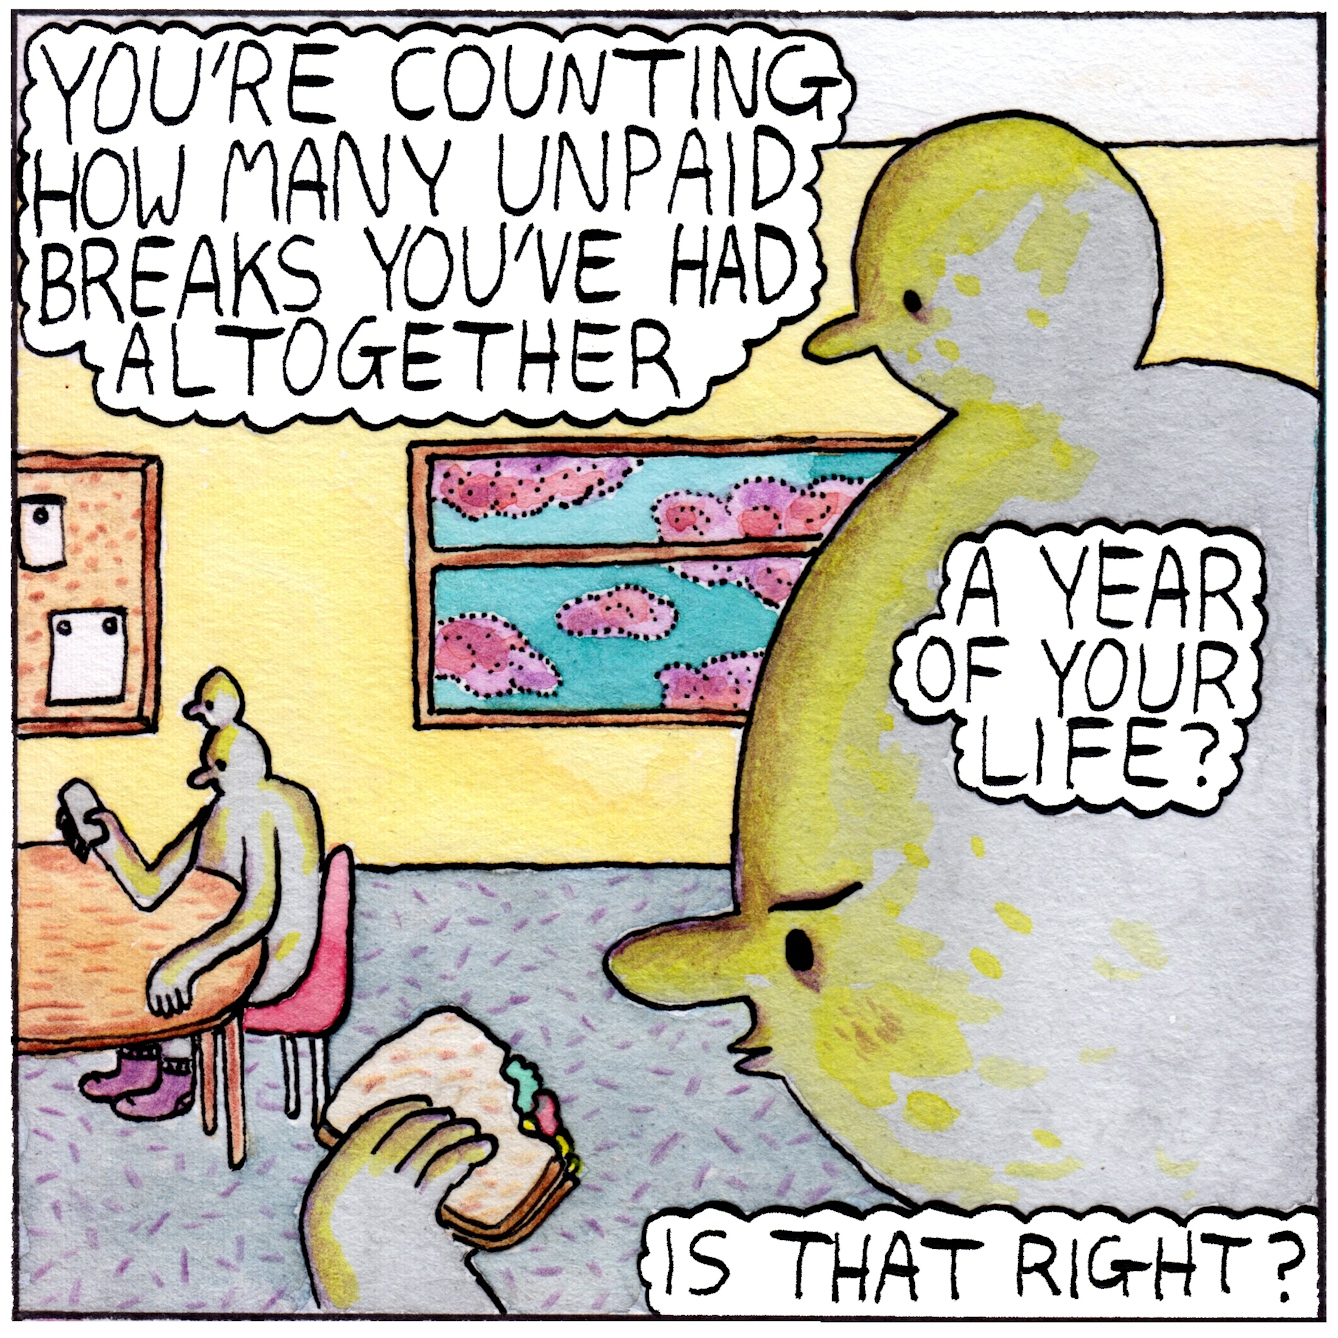 Panel one of the webcomic 'Unpaid break'. A character sits at a table in a work room with a noticeboard and a large window on the wall behind them. They are looking at a sandwich in their hand. The figure has a second smaller head emerging from the top of its main head, also looking, expressionless, at the sandwich. In foreground to the right of the frame is a close up of the character's two heads and the hand holding the sandwich. The speech bubble at the top of the panel says "You're counting how many unpaid breaks you've had altogether". Two other speech bubbles over the close up of the heads say "A year of your life?" and "Is that right?"